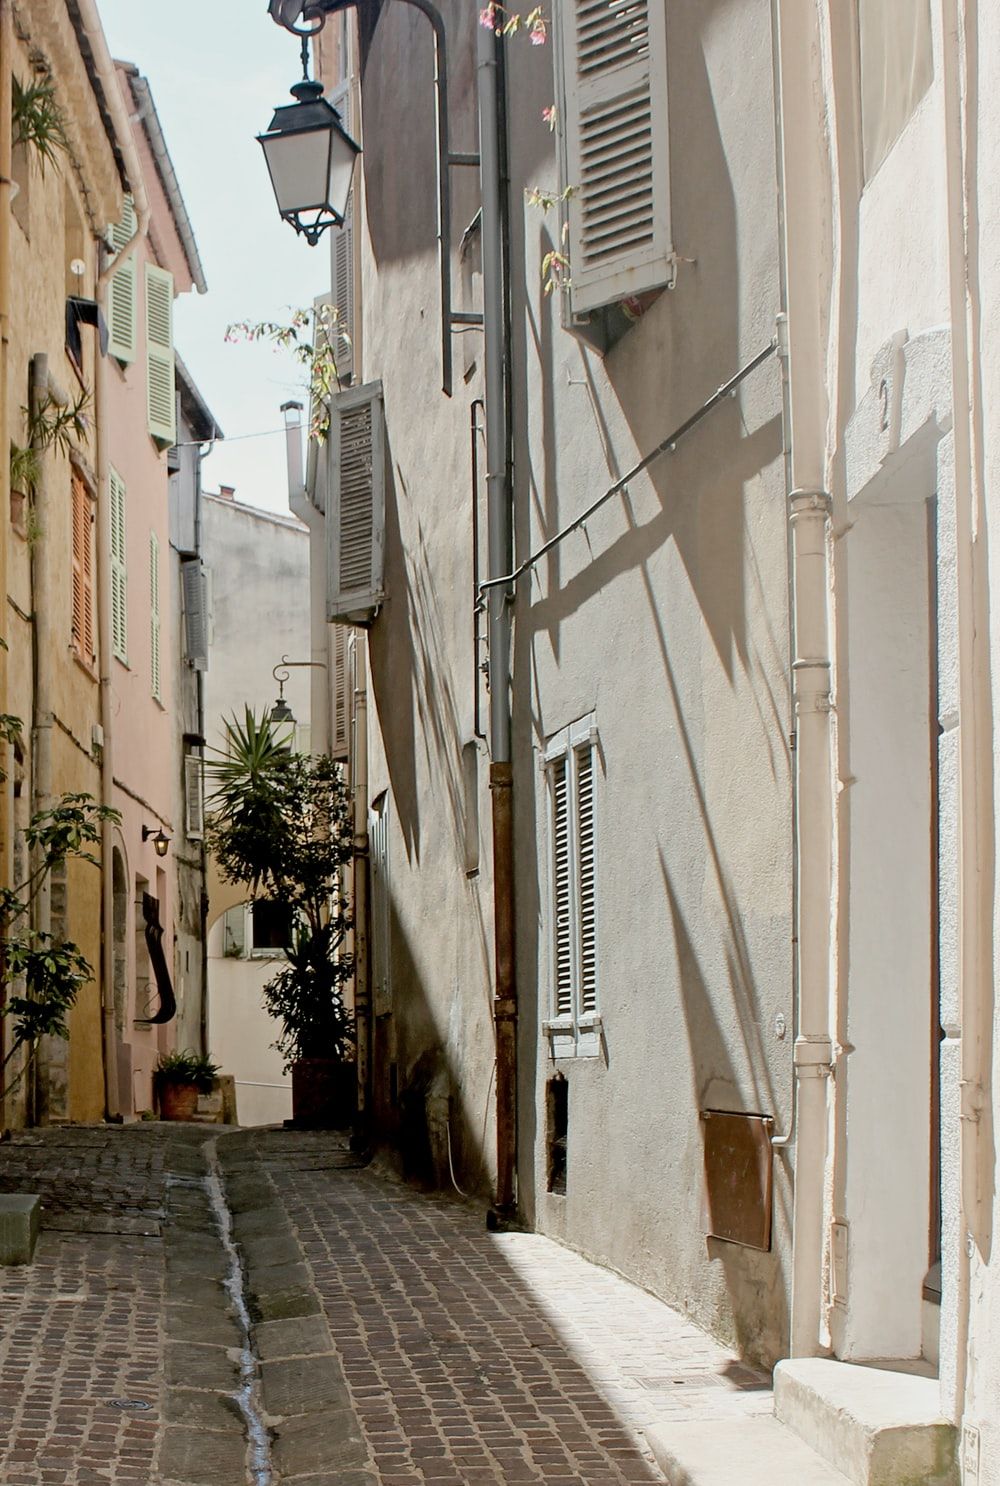 Alleyway Picture. Download Free Image